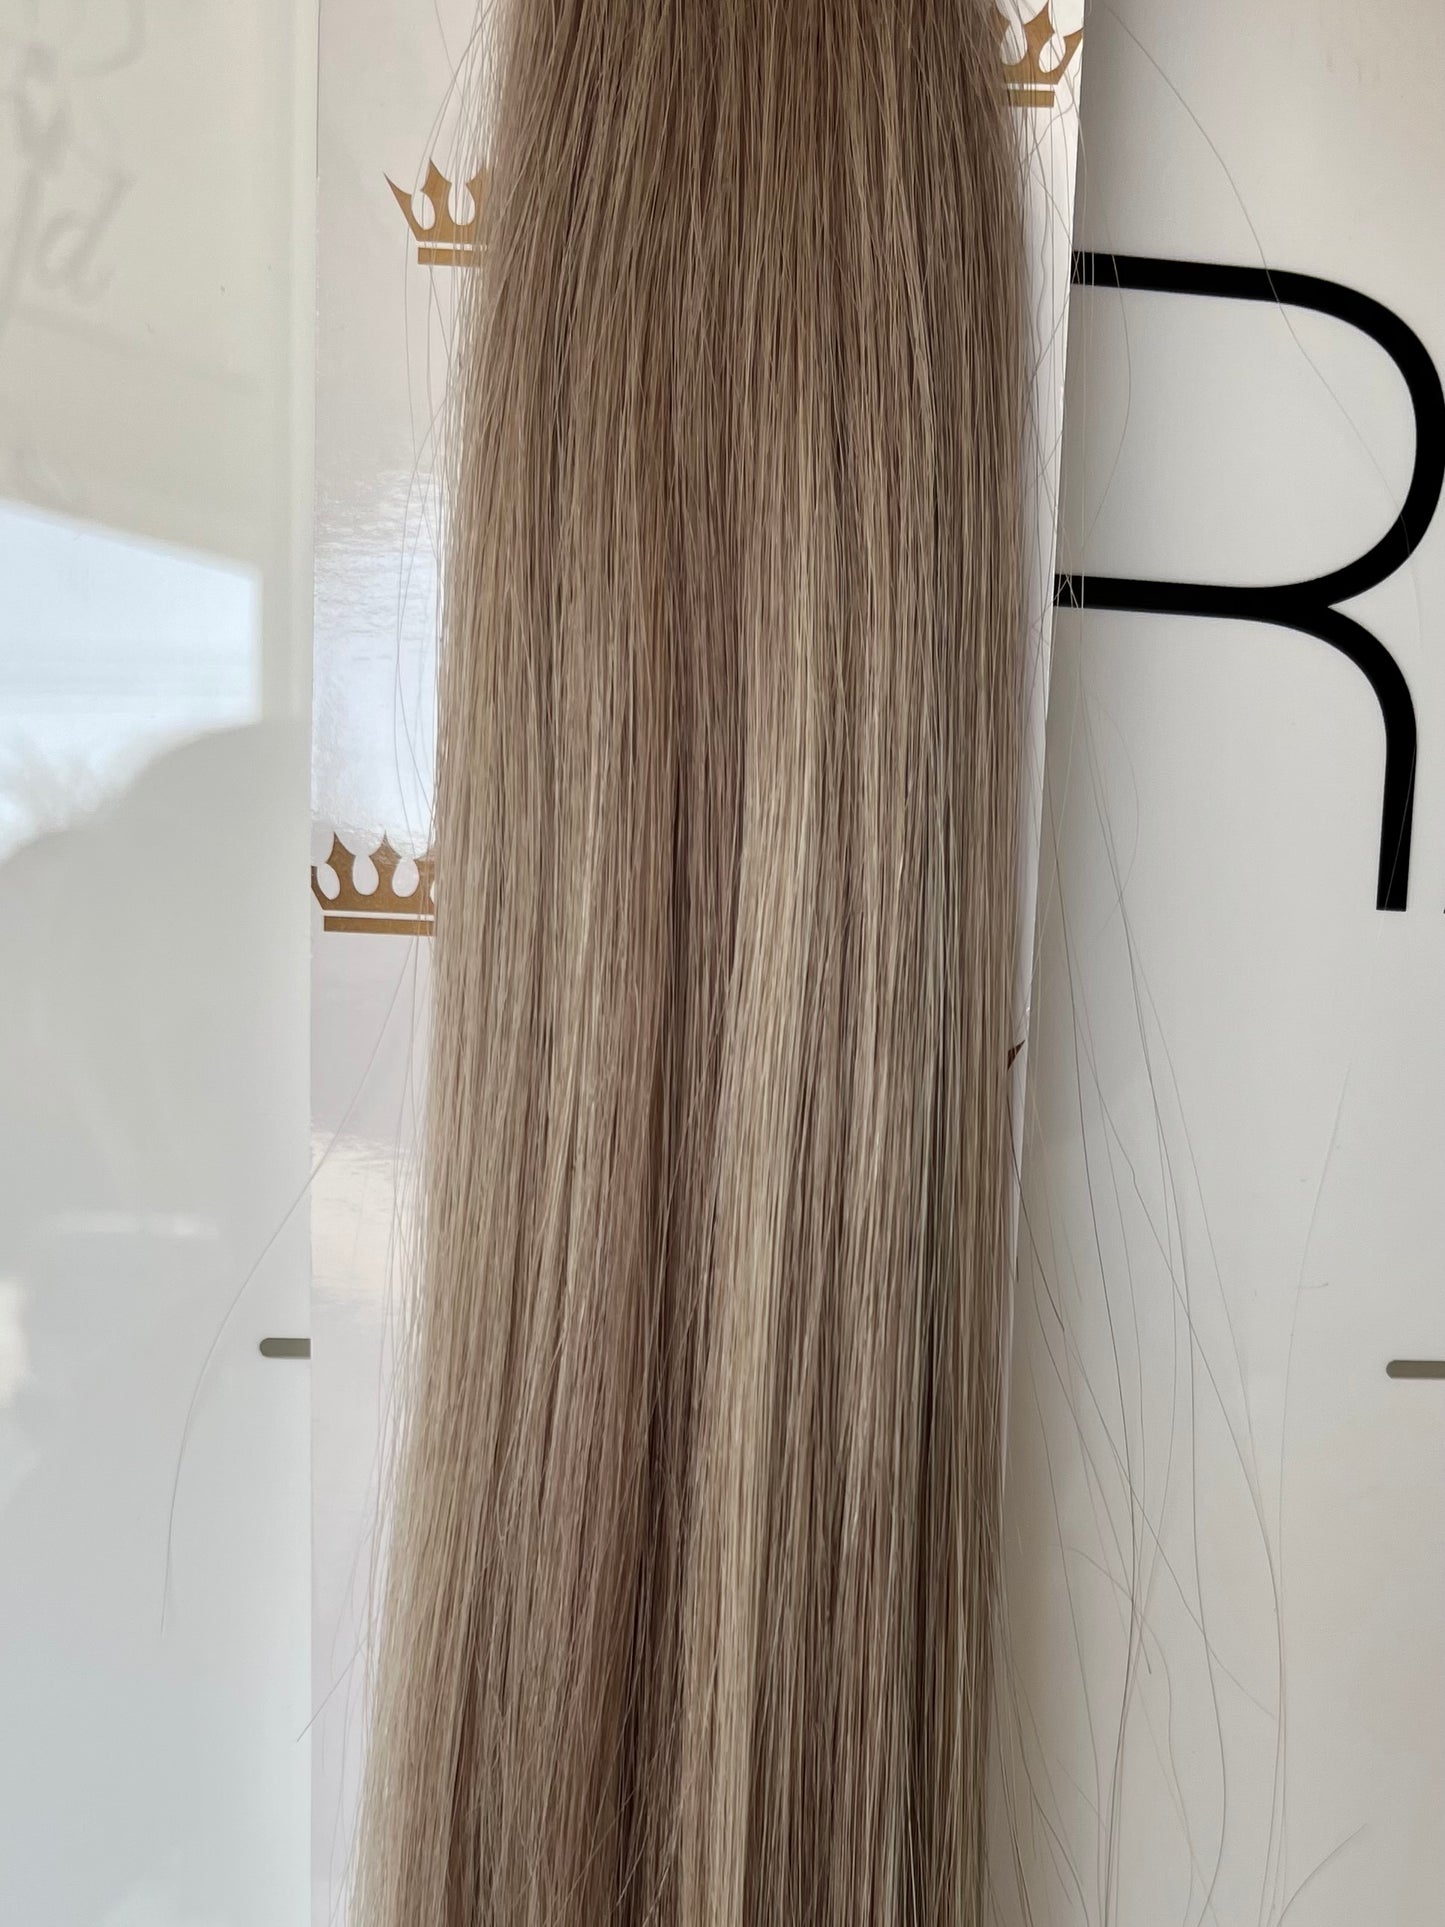 RETAIL CLIP IN EXTENSIONS - BALAYAGE - SILVER LINING